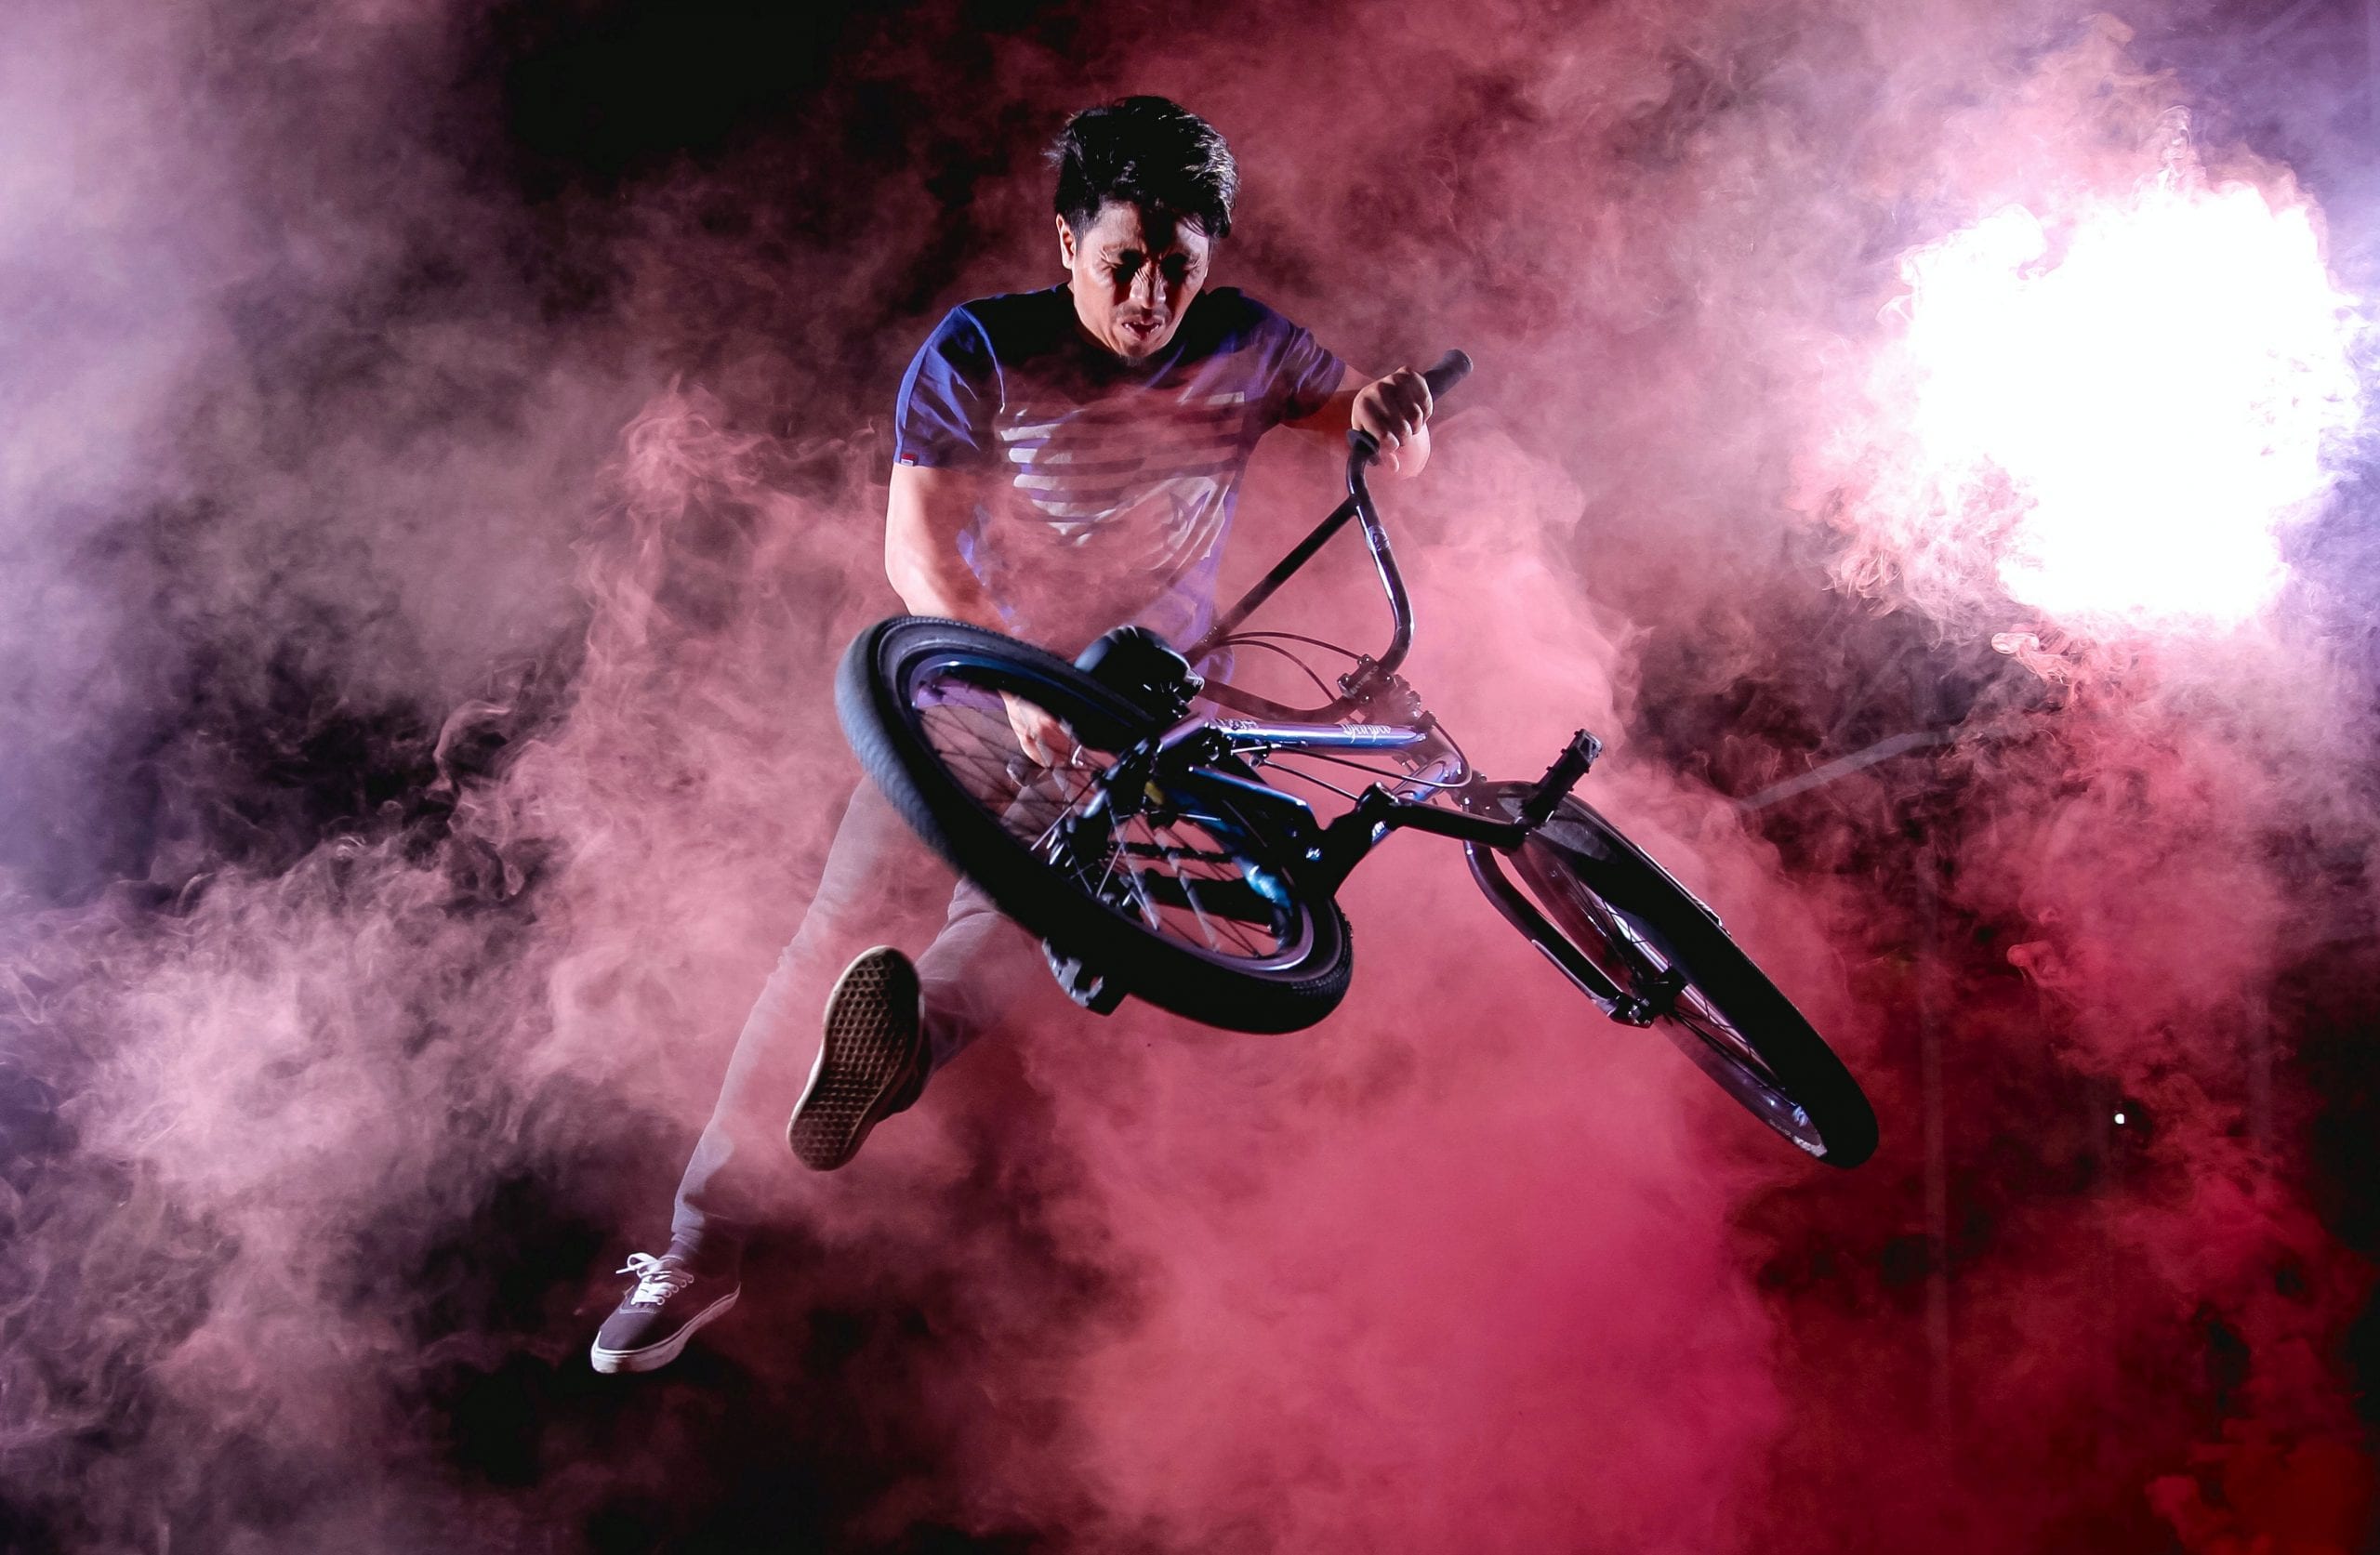 Bicycle rider in mid-air in the midst of a smokescreen